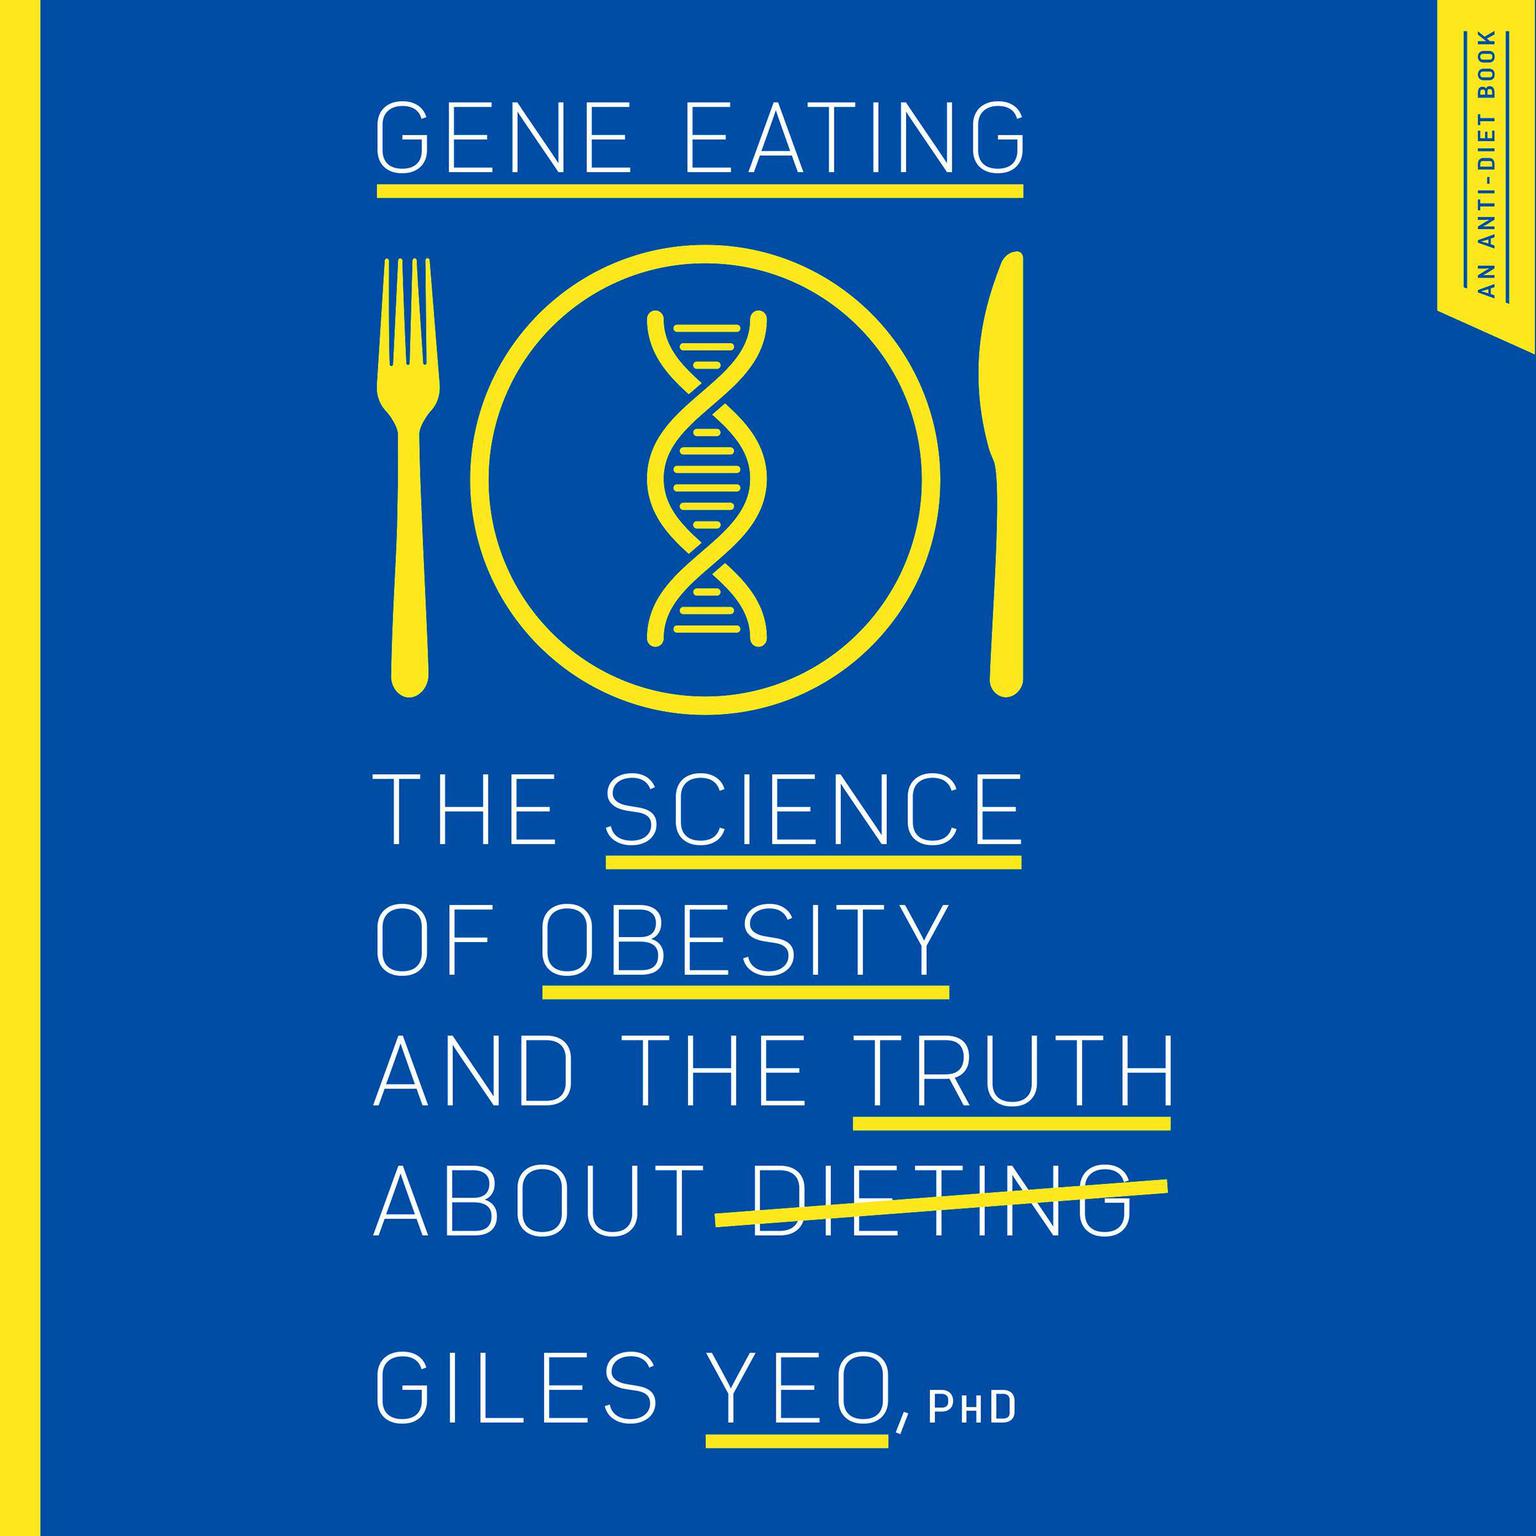 Gene Eating: The Science of Obesity and the Truth About Dieting Audiobook, by Giles Yeo